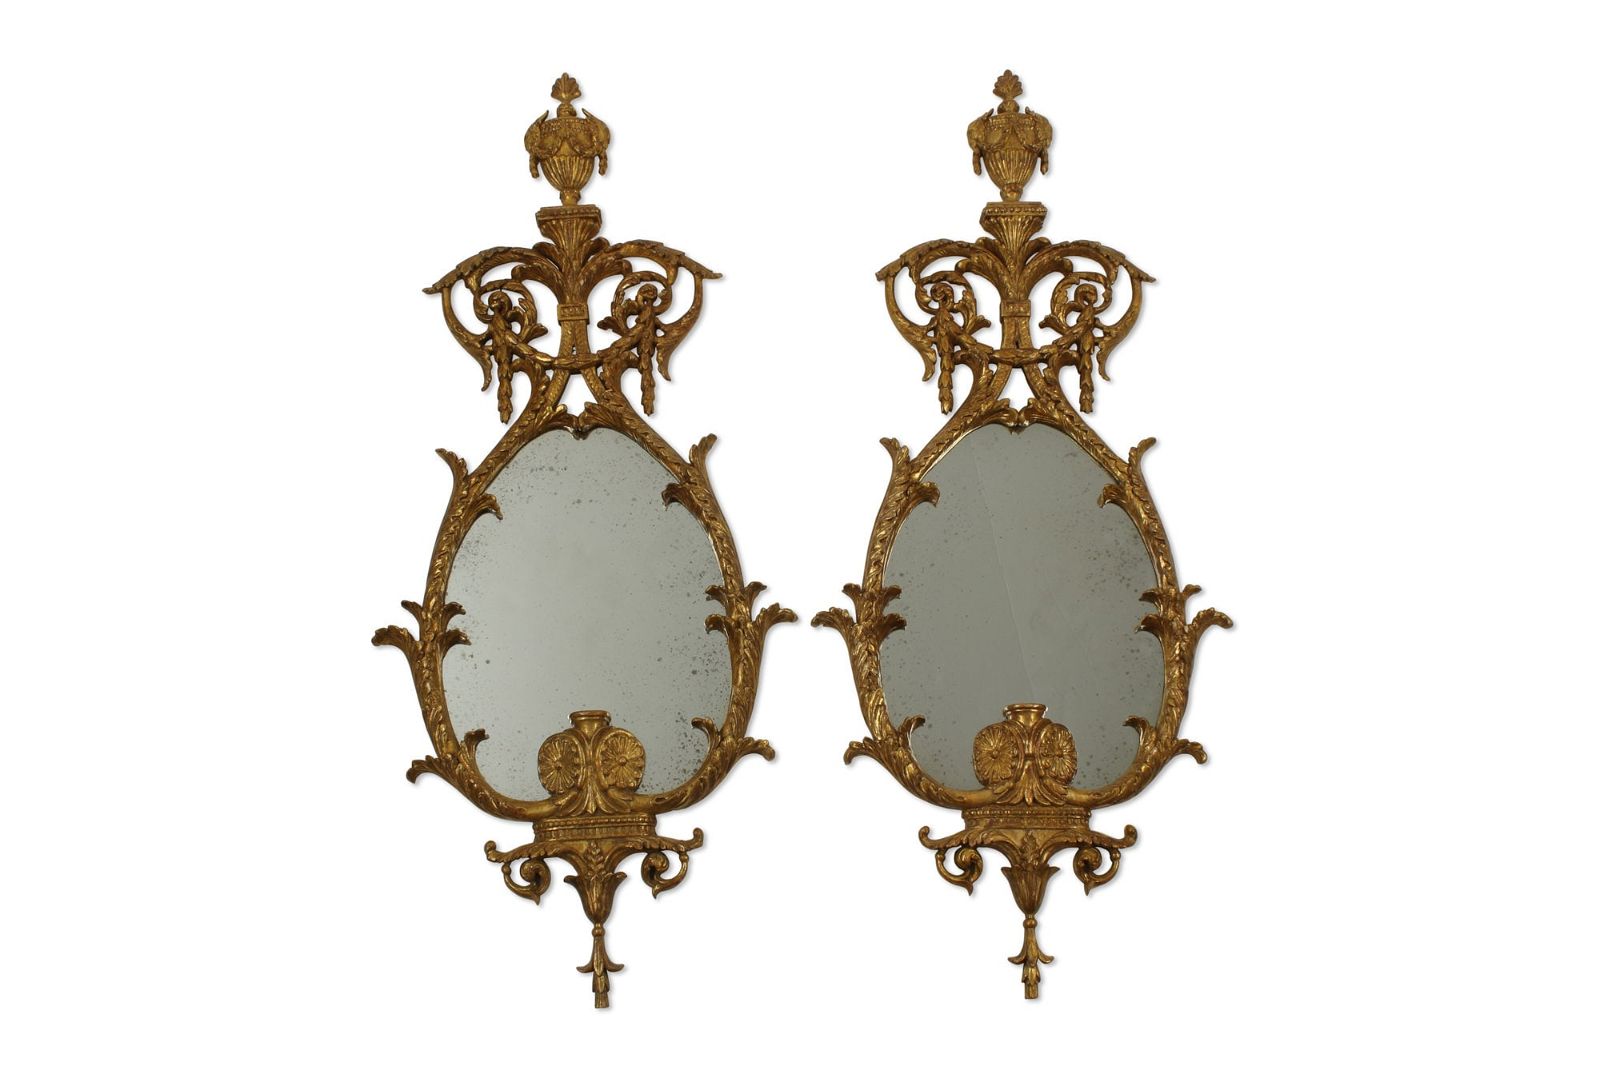 A PAIR OF GEORGE III STYLE GILTWOOD 2fb359b